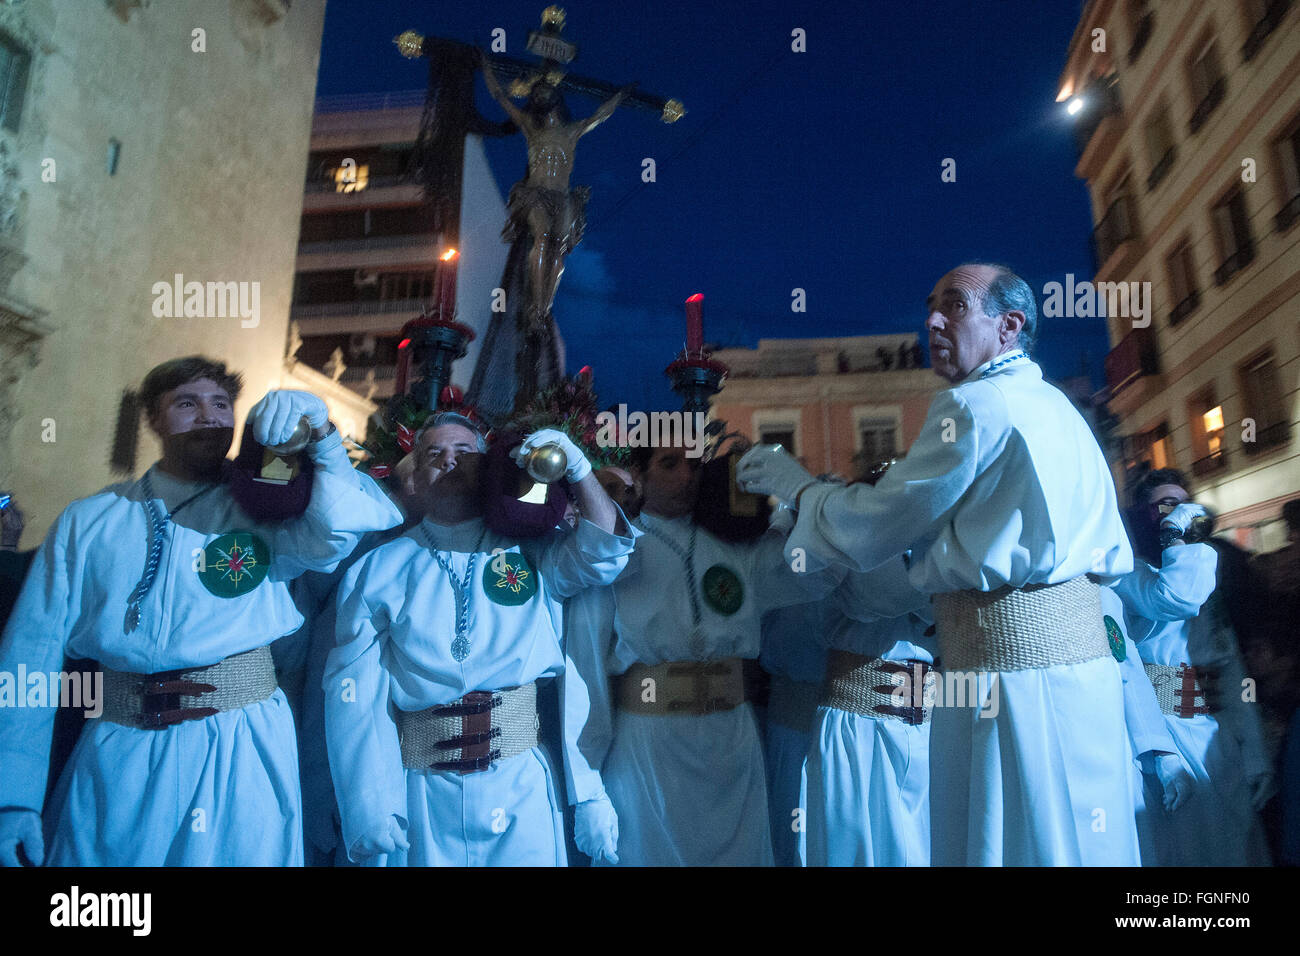 The Brotherhood of the Holy Cross is preparing to make its way in the sea procession of Christ Stock Photo